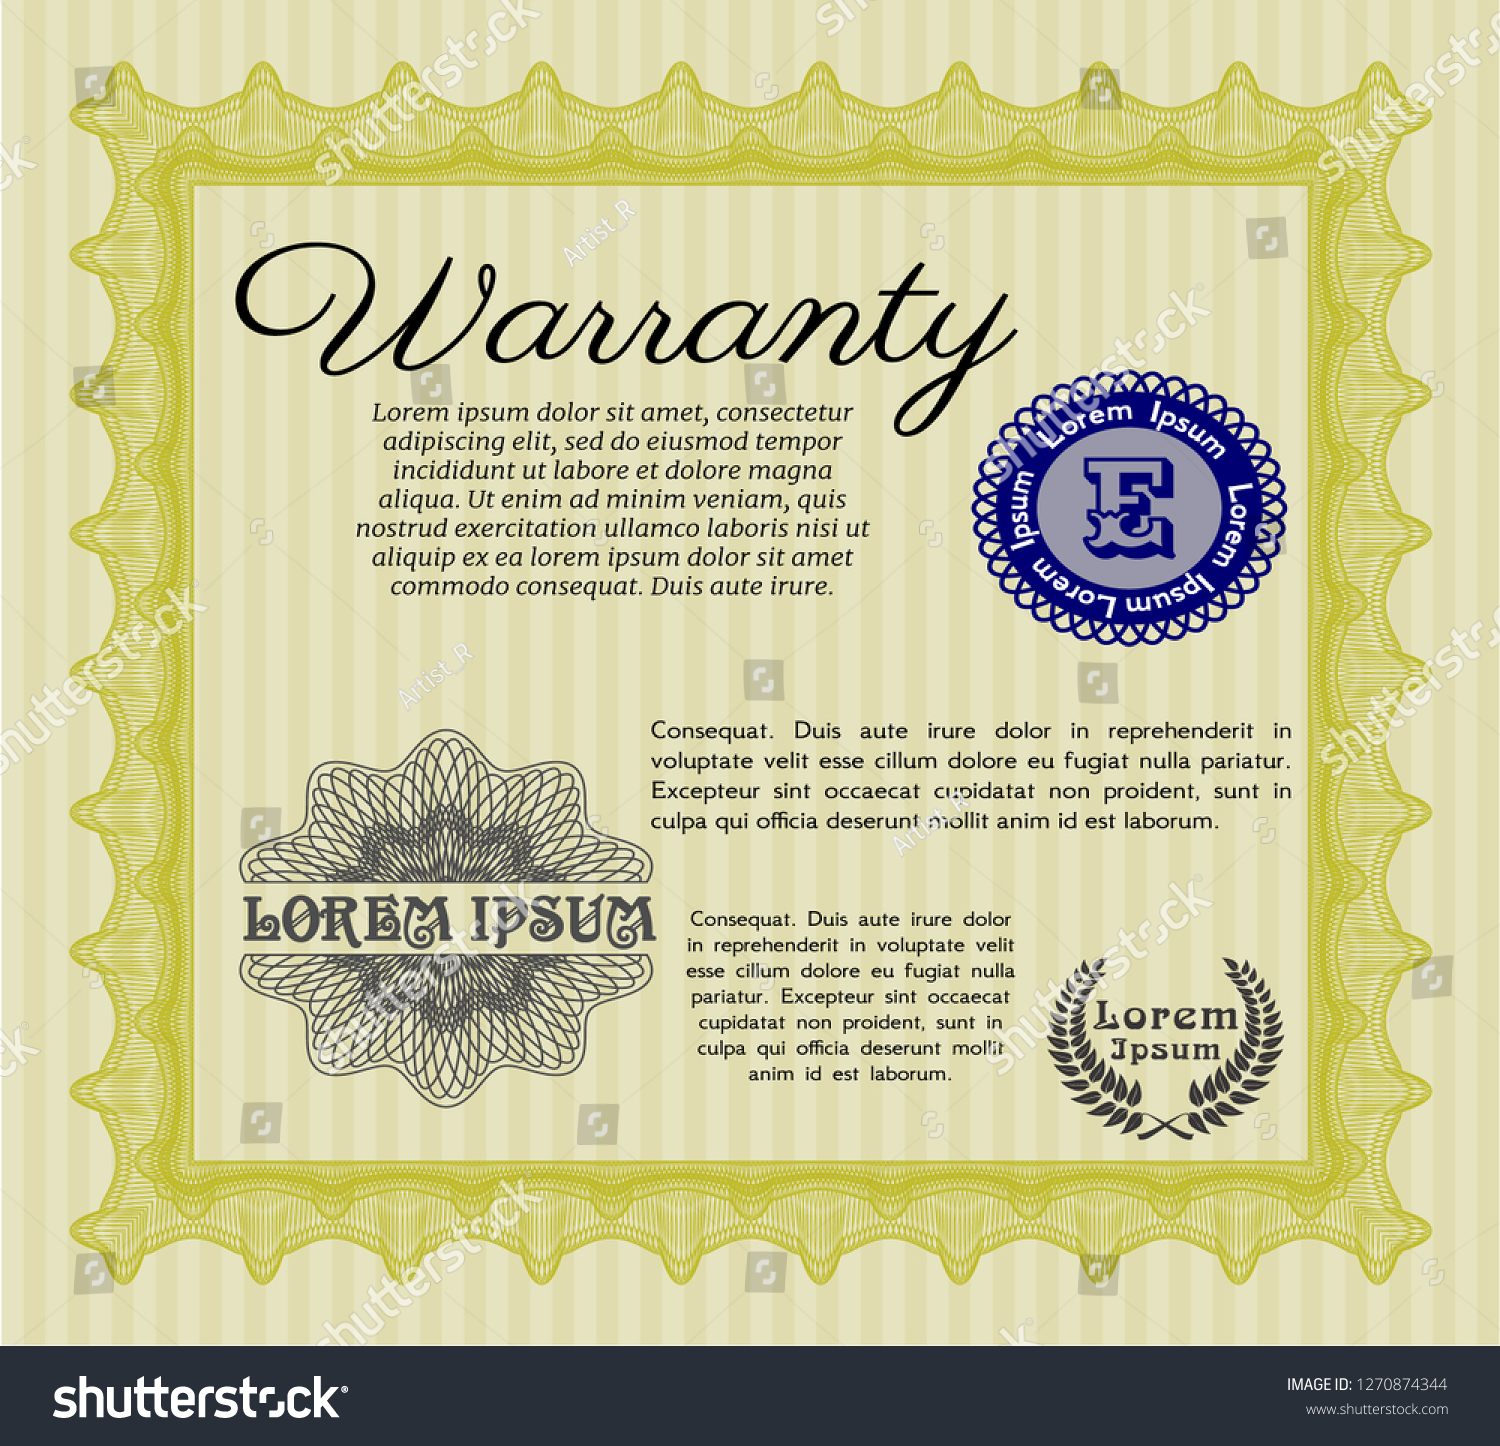 Yellow Vintage Warranty template. Cordial design. Detailed. Easy to print.  #1270874344